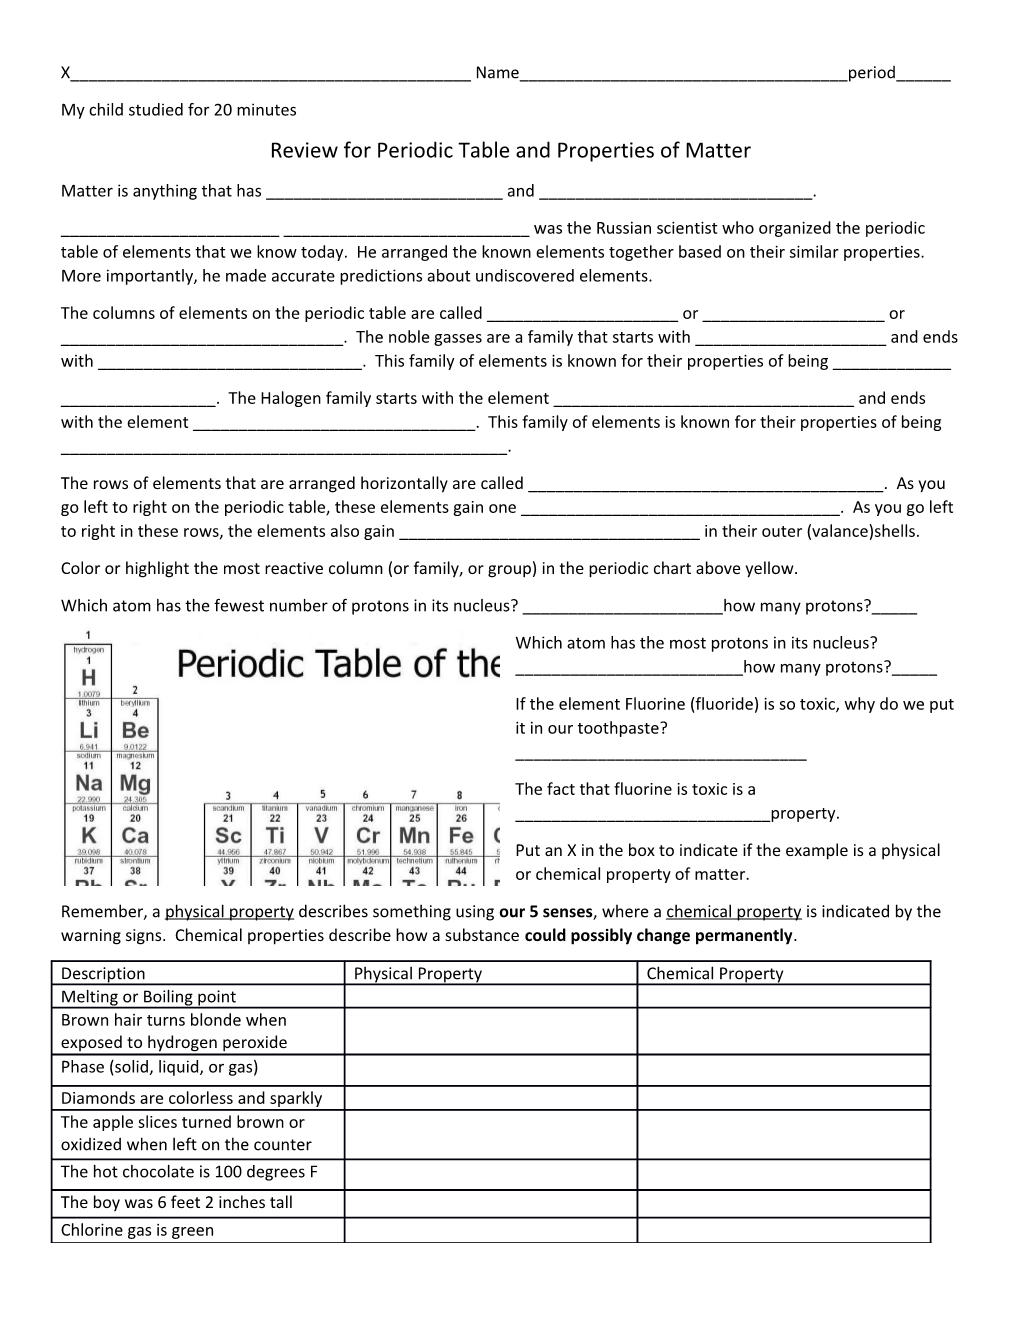 Review for Periodic Table and Properties of Matter